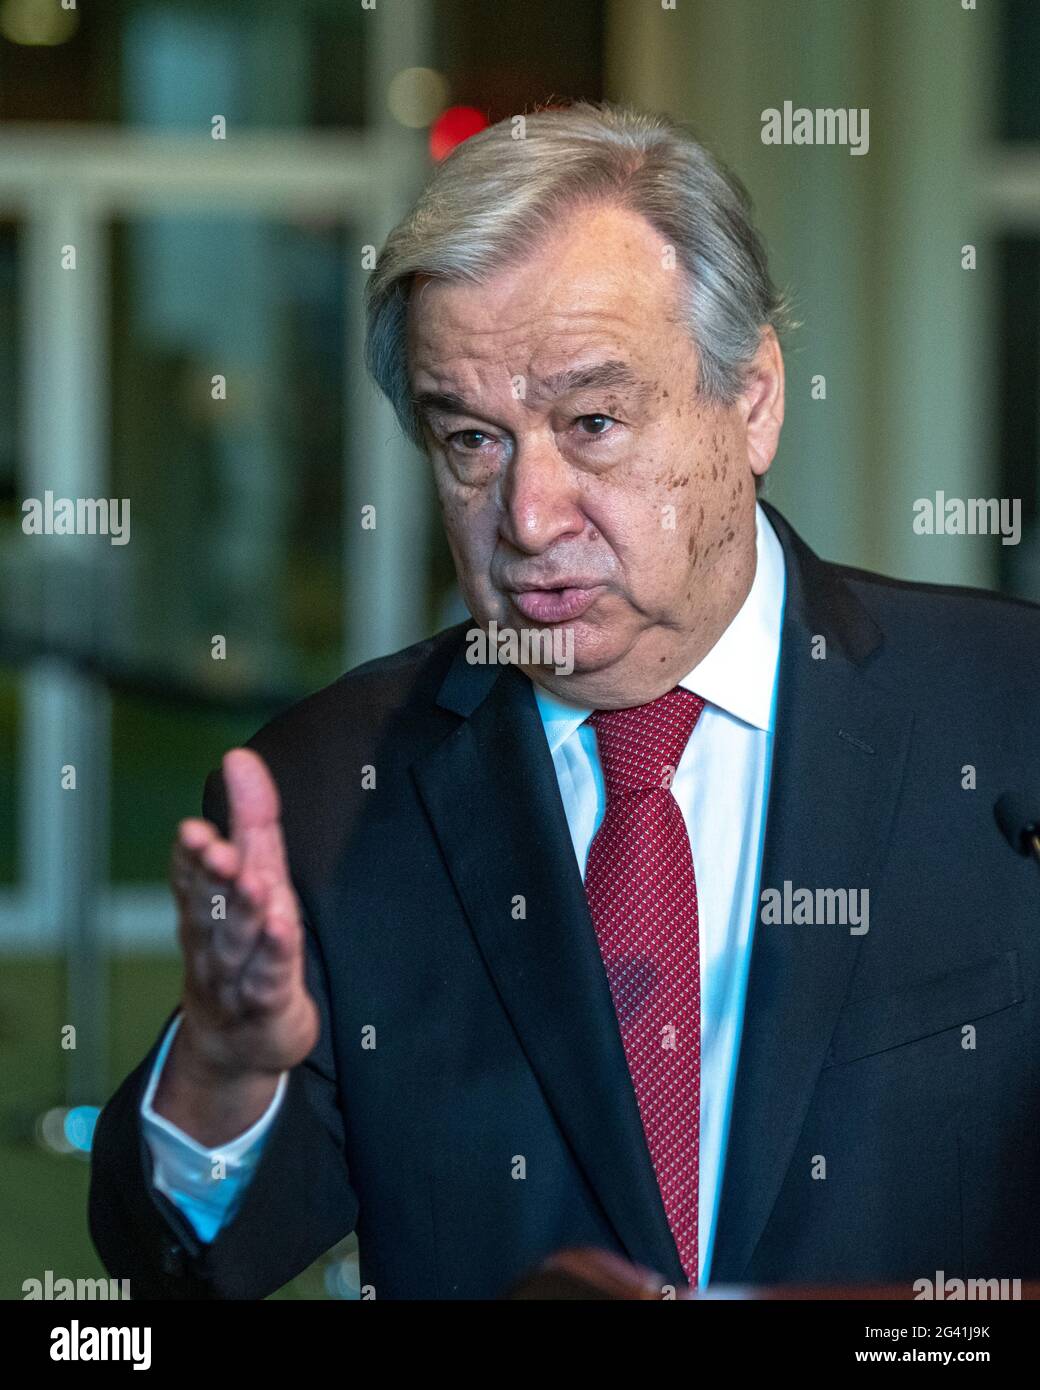 New York, USA. 18th June, 2021. United Nations Secretary-General António Guterres speaks after being reelected for a second 5-year term starting January 1st. Guterres said that democracy must be reinstated in Myanmar, political detainees must be freed and human rights abuses and killings must stop. Credit: Enrique Shore/Alamy Live News Stock Photo